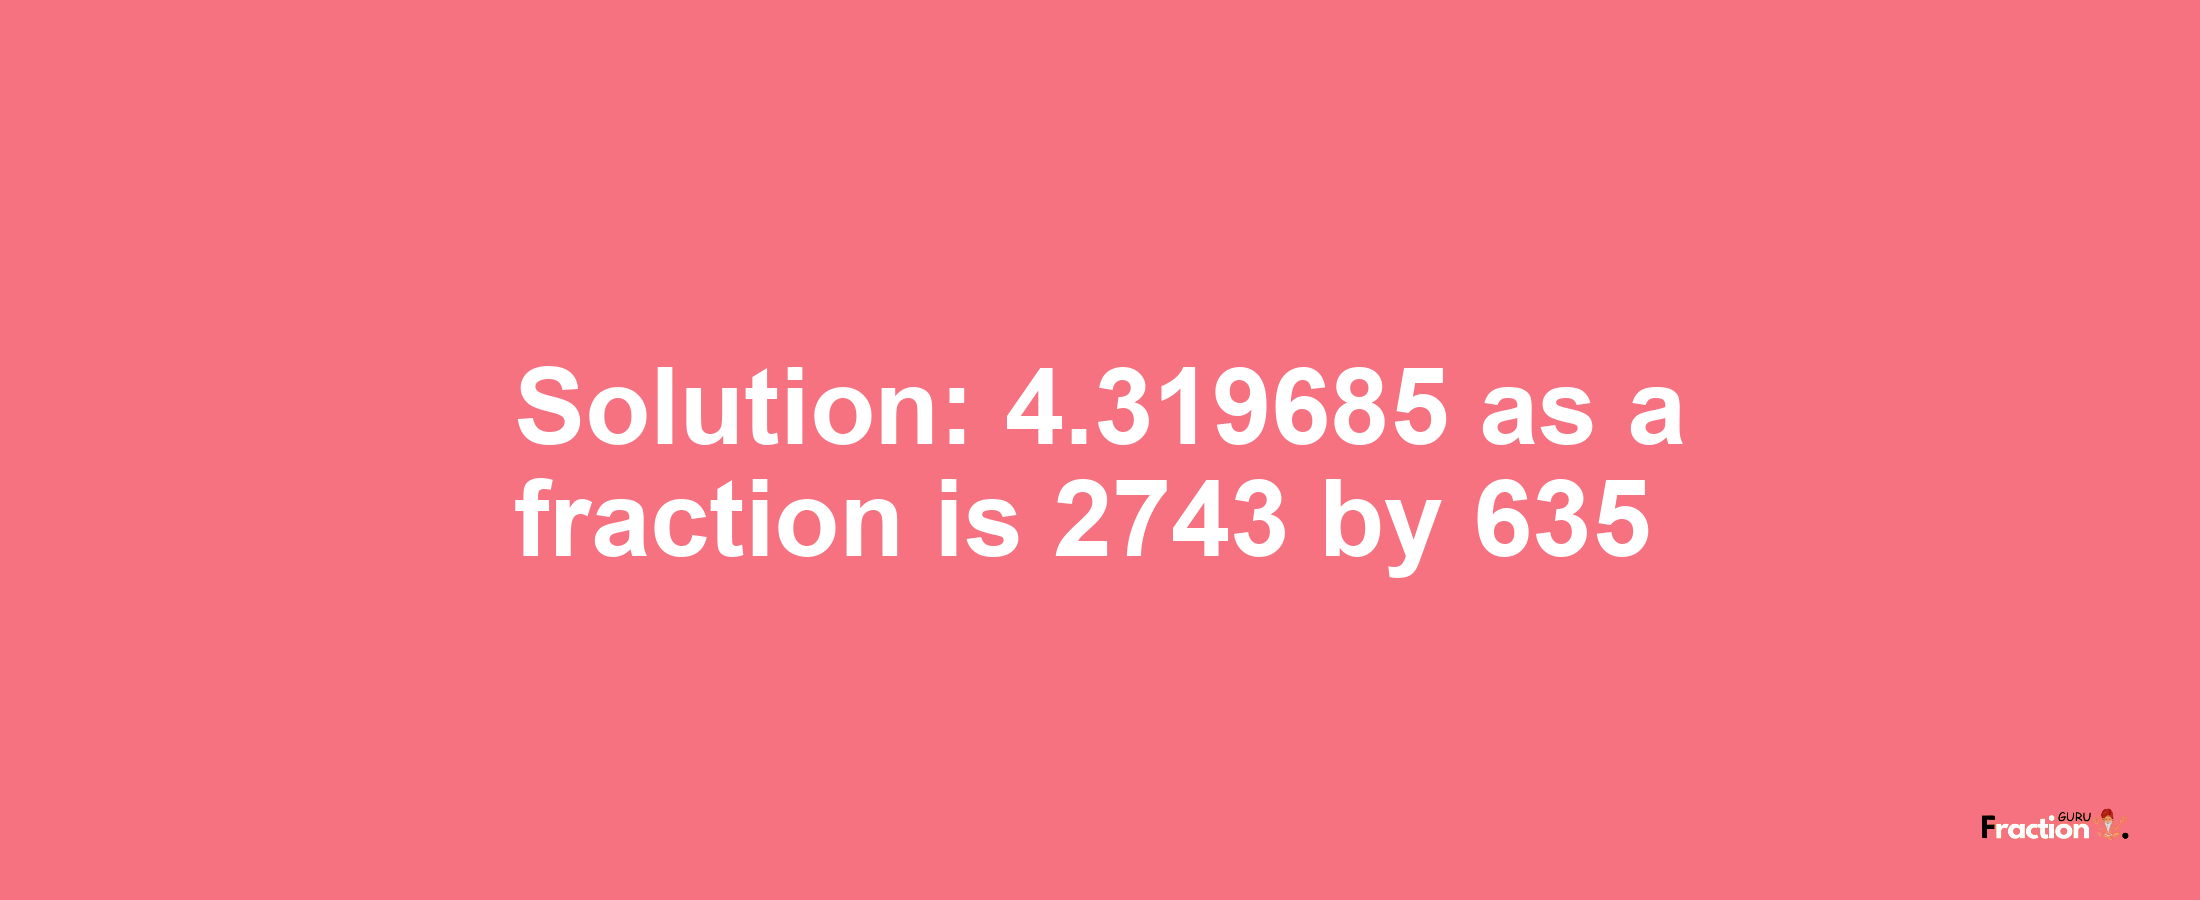 Solution:4.319685 as a fraction is 2743/635